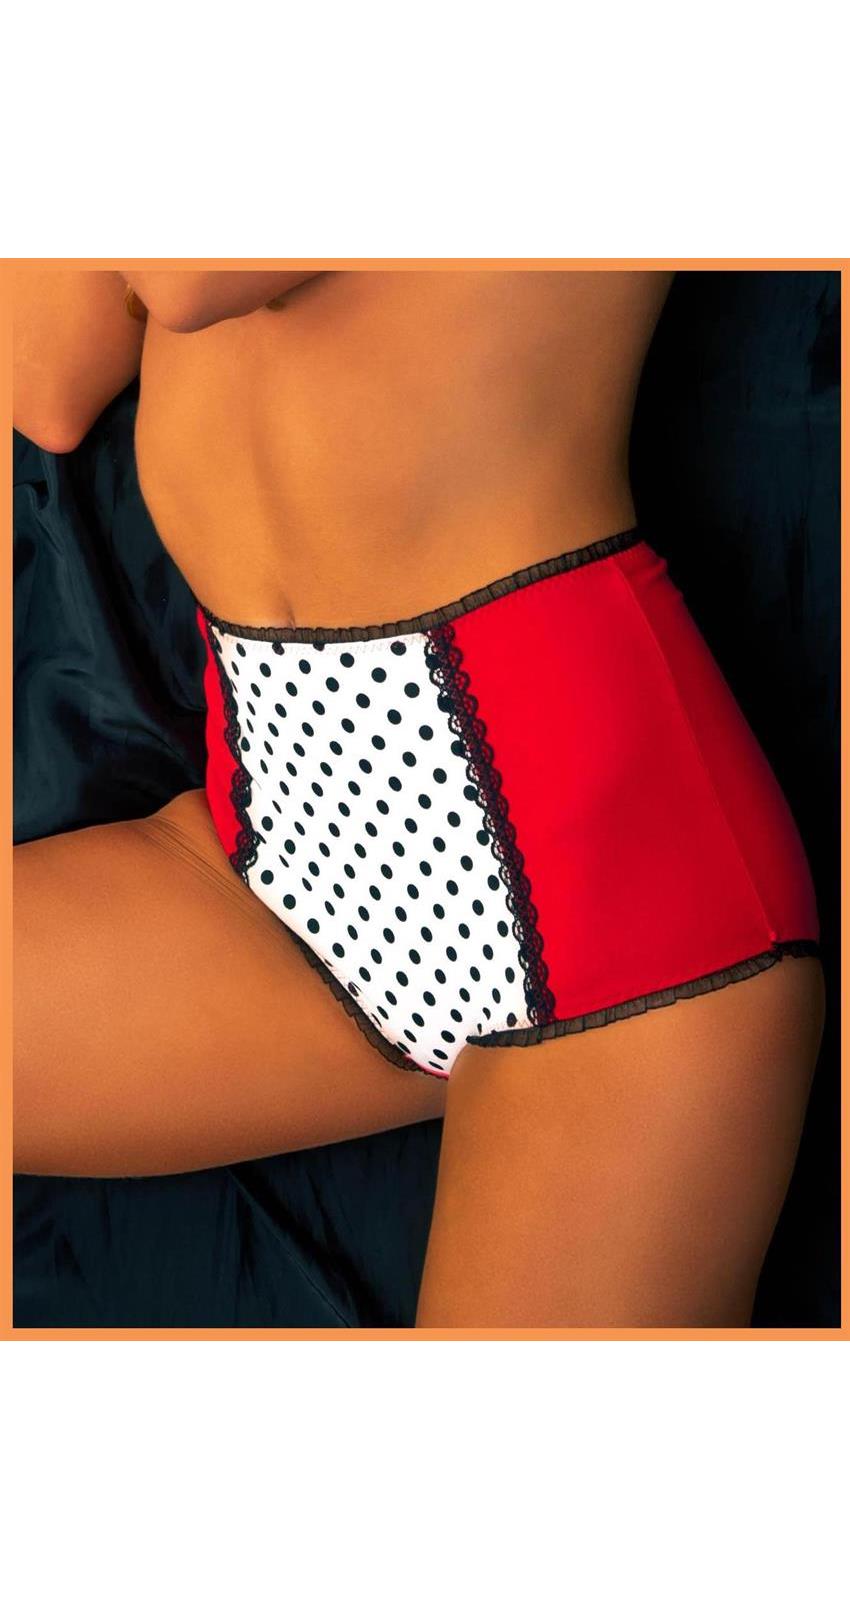 Fearless and Fun (FAF) Women's Large Polka Dot High Waist Viscose Panties - White/Red/Black - L for Valentines Day